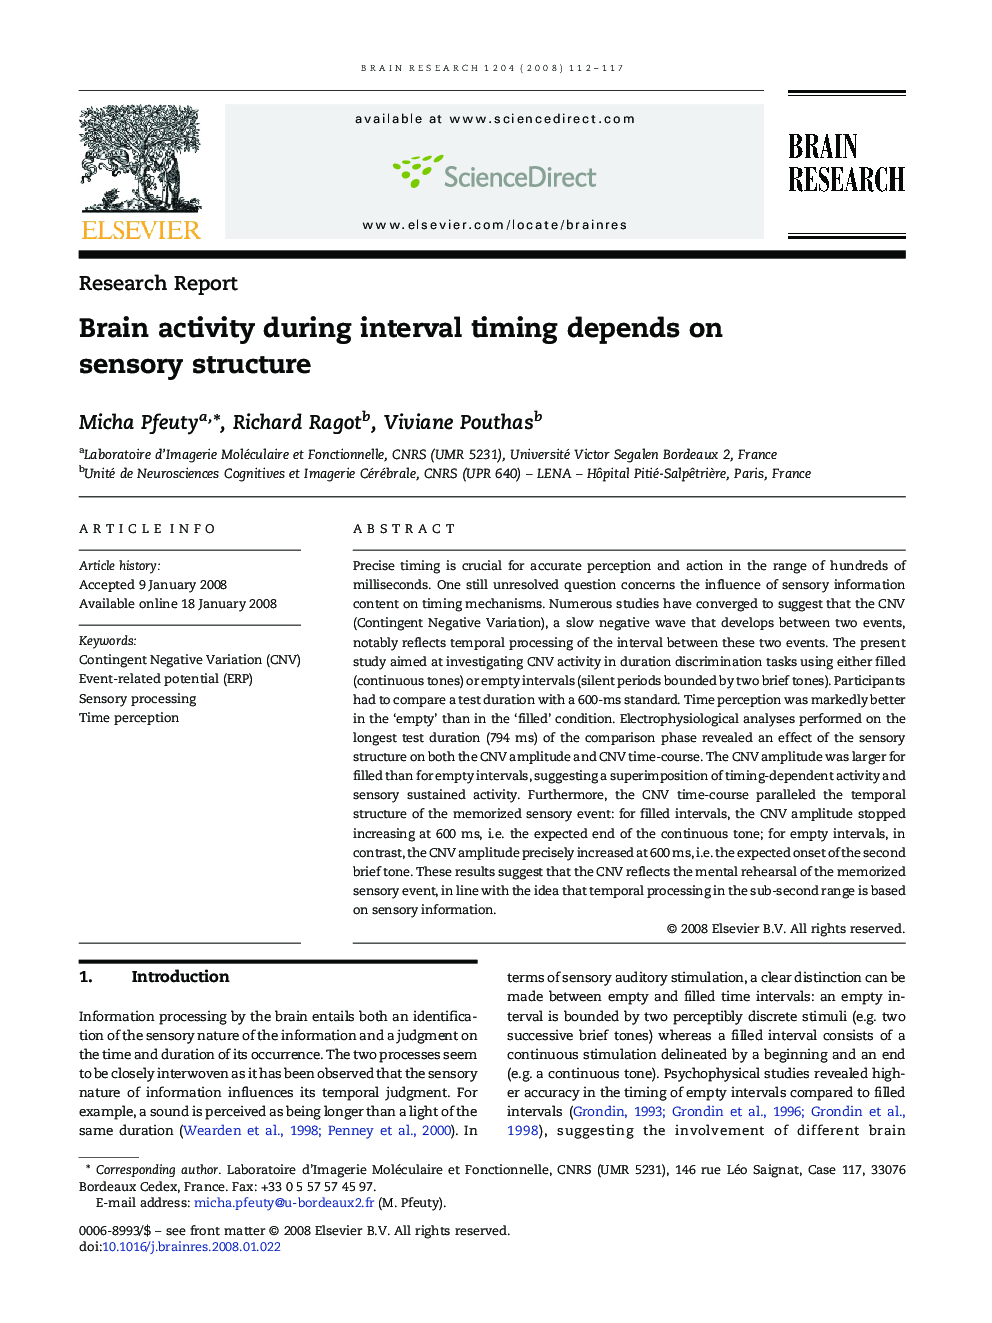 Brain activity during interval timing depends on sensory structure